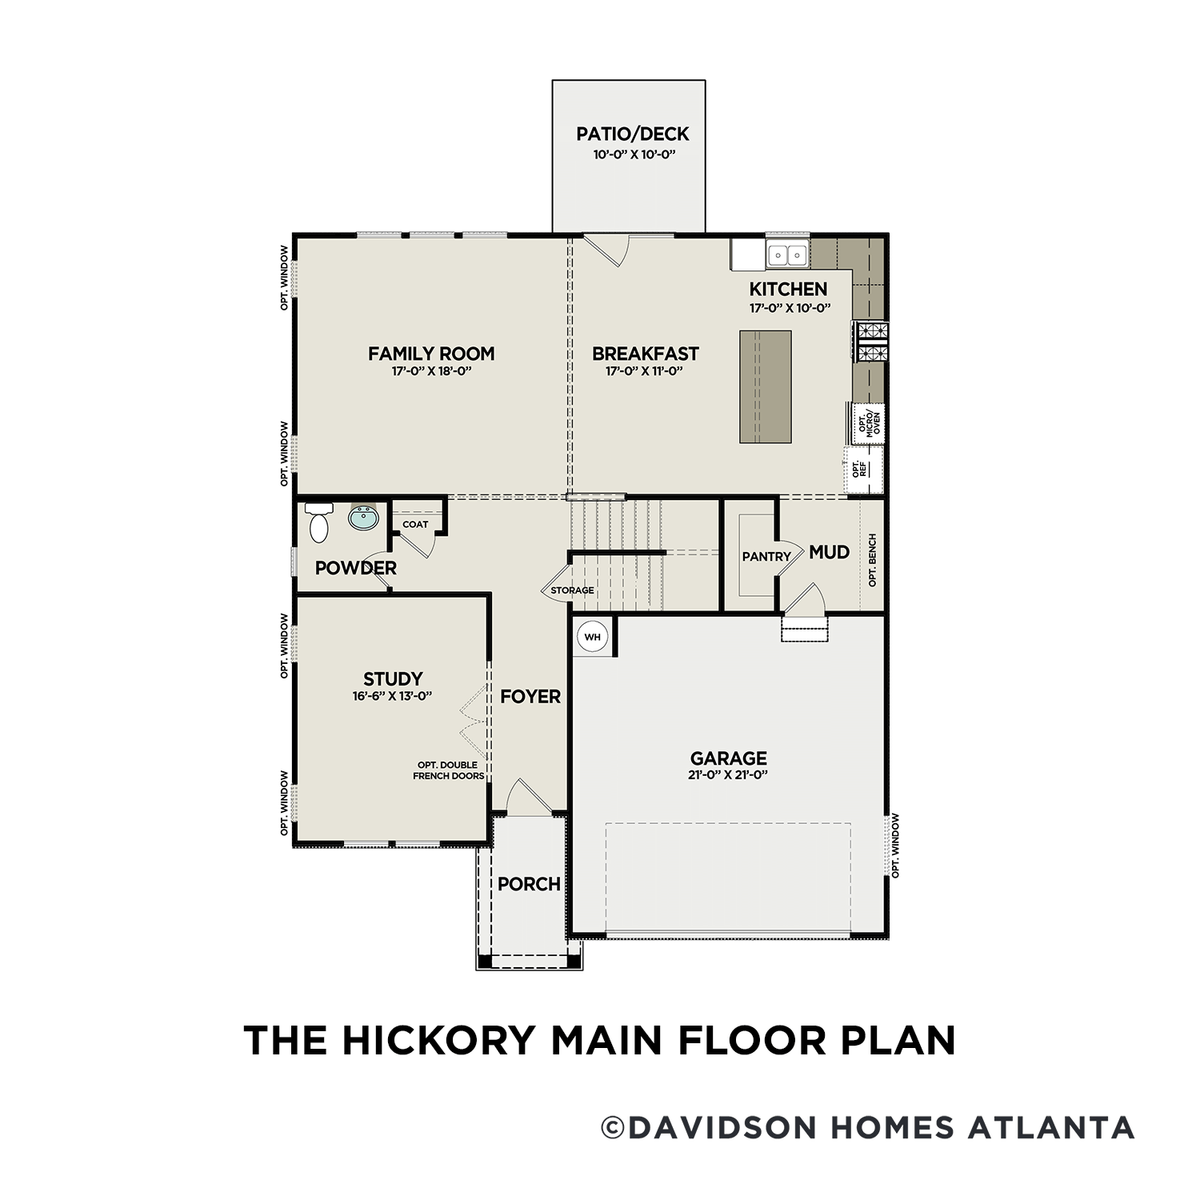 1 - The Hickory B floor plan layout for 346 Riverwood Drive in Davidson Homes' Riverwood community.